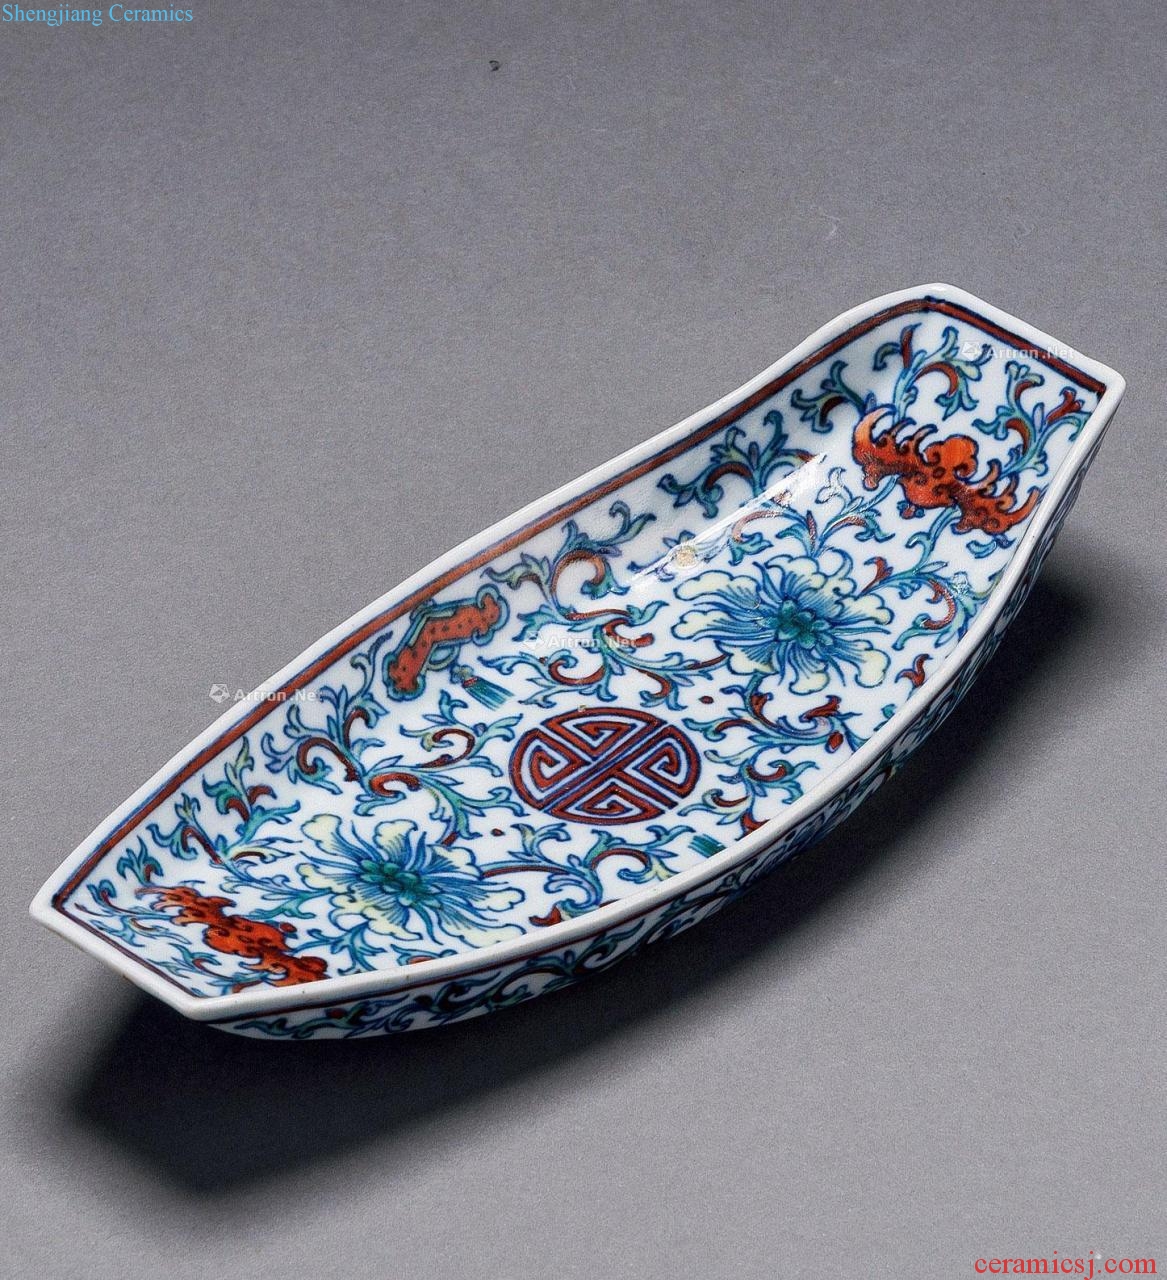 Jiaqing bucket color decorative pattern boat form of a dish